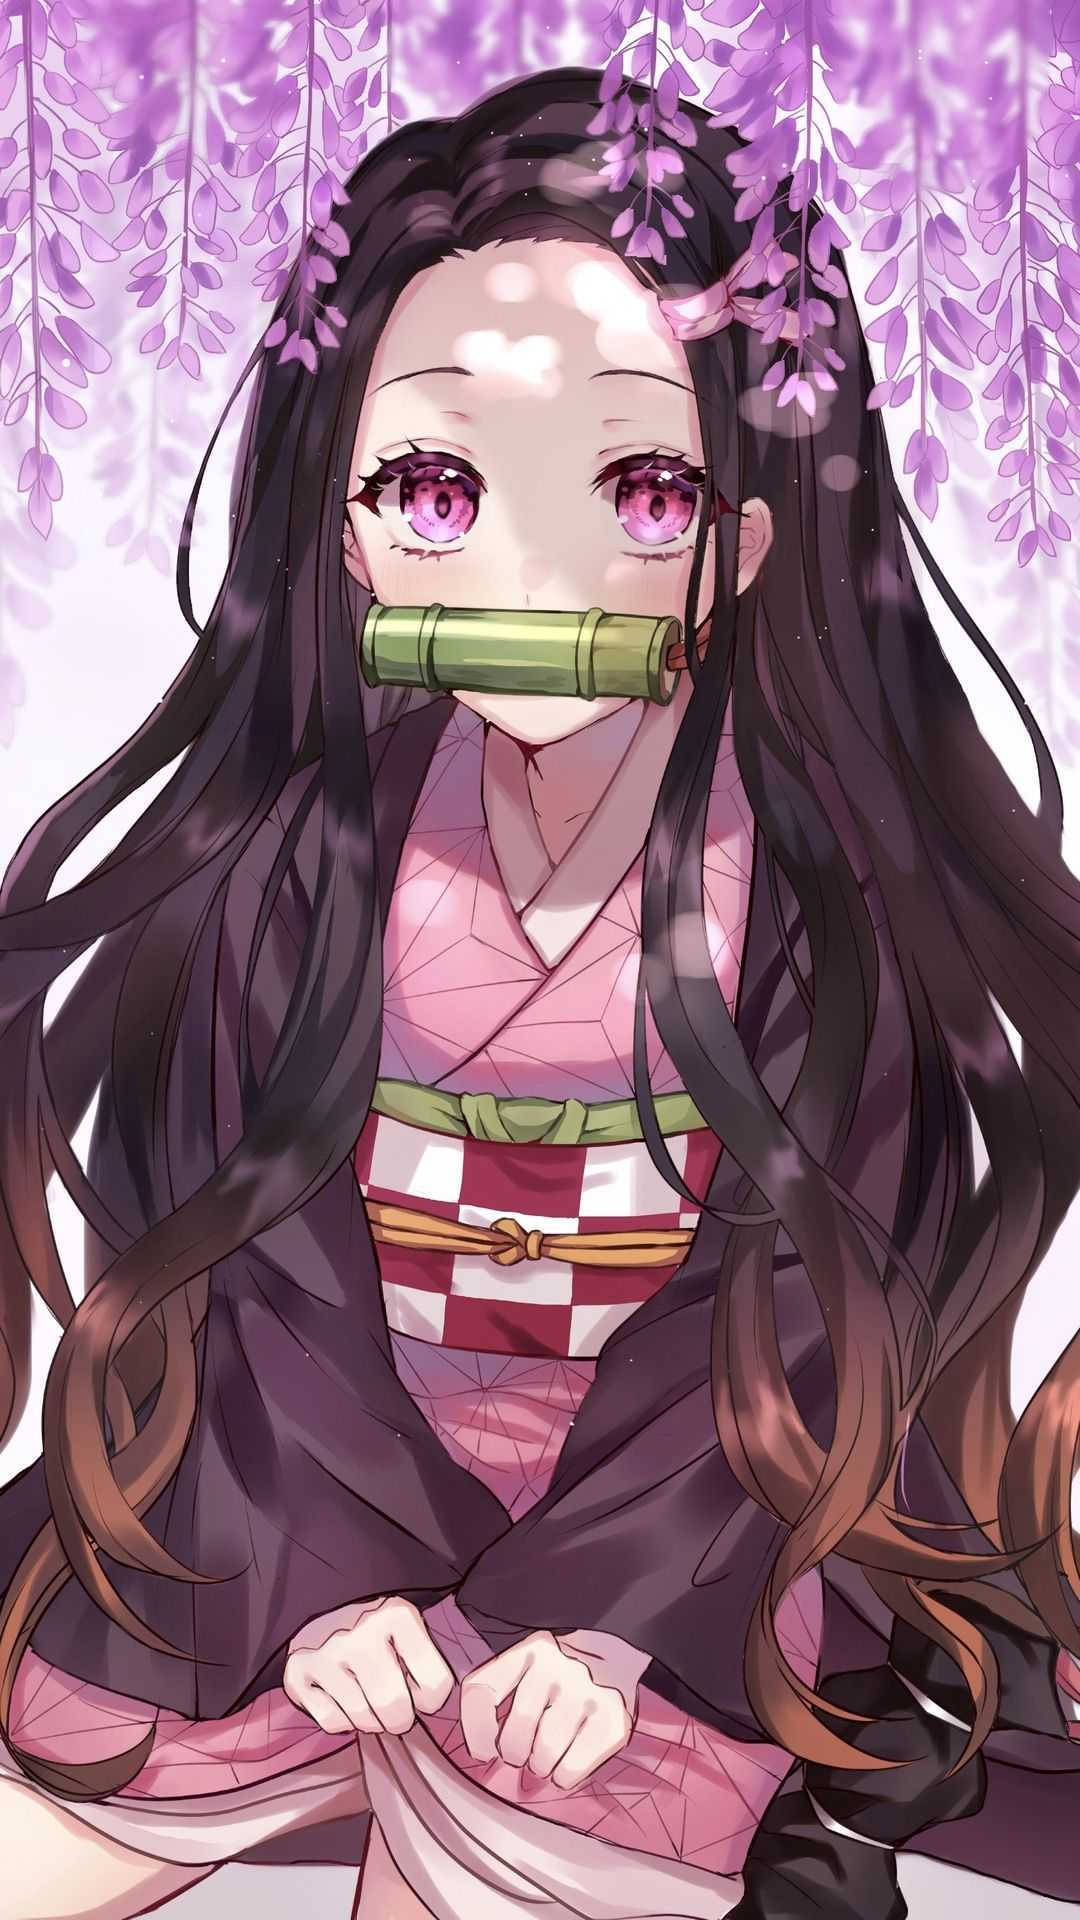 1080X1920 Anime Girl Wallpaper and Background